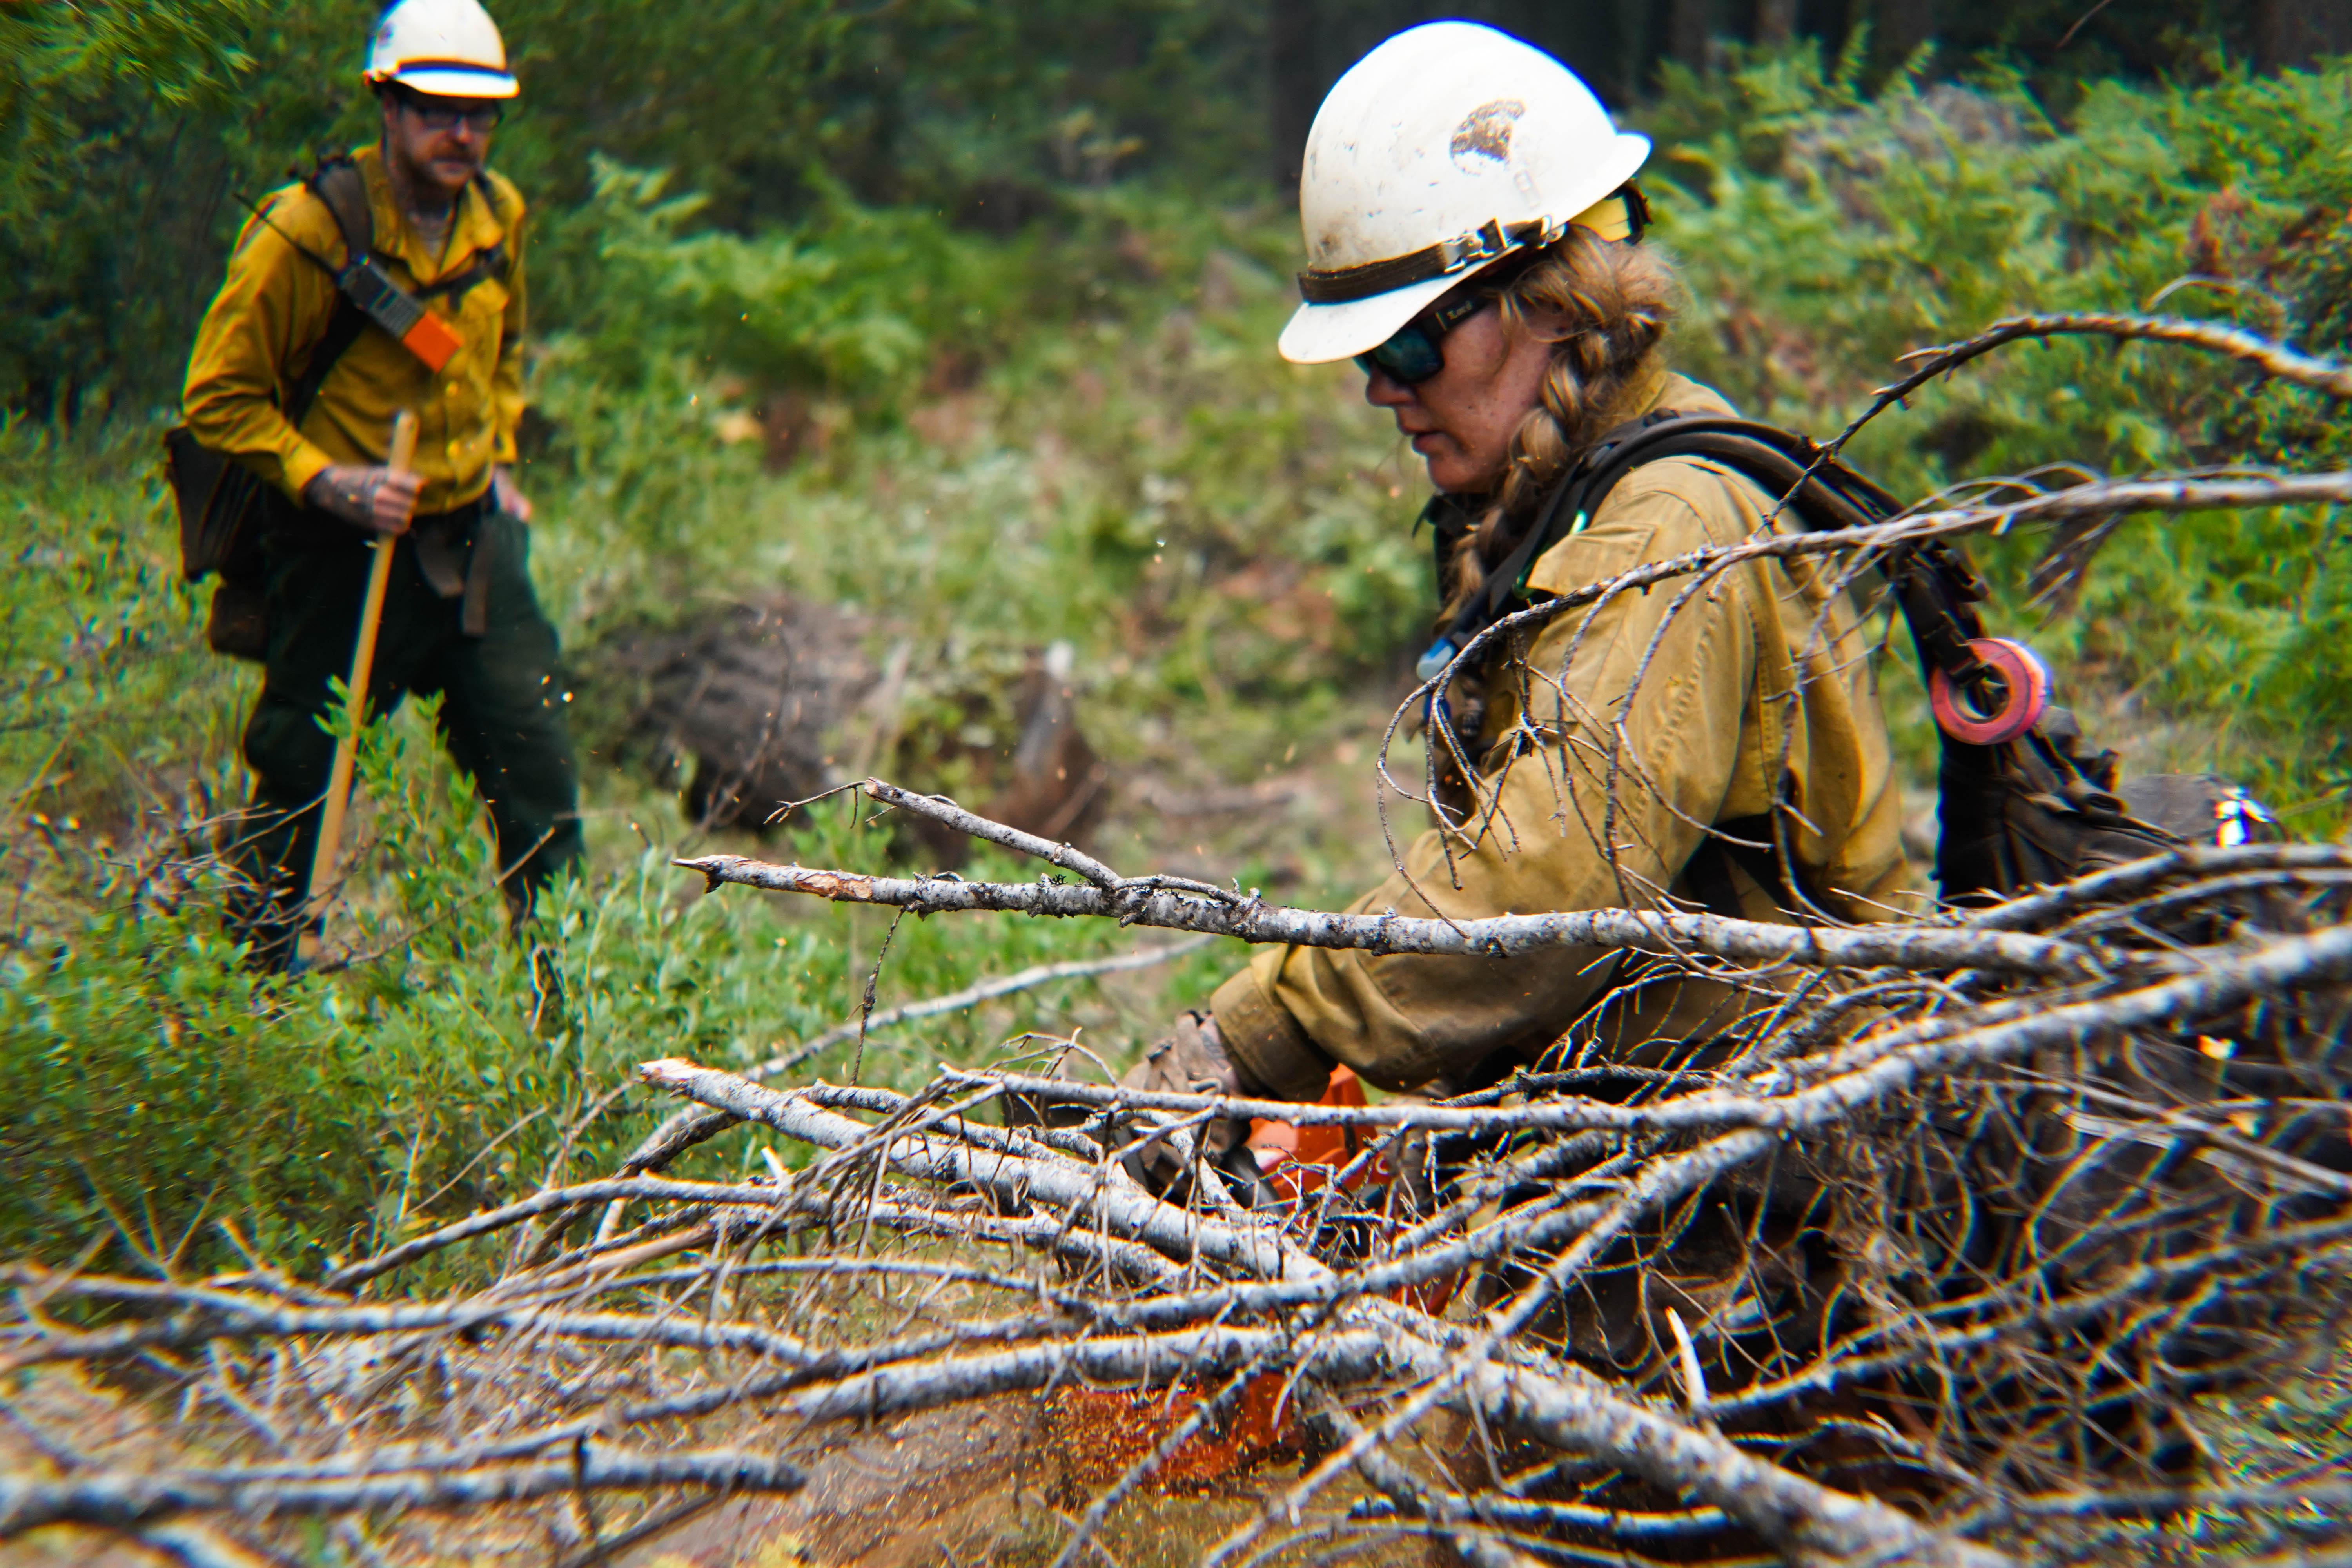 A female firefighter uses a chainsaw to clear brush in a dense forested environment.